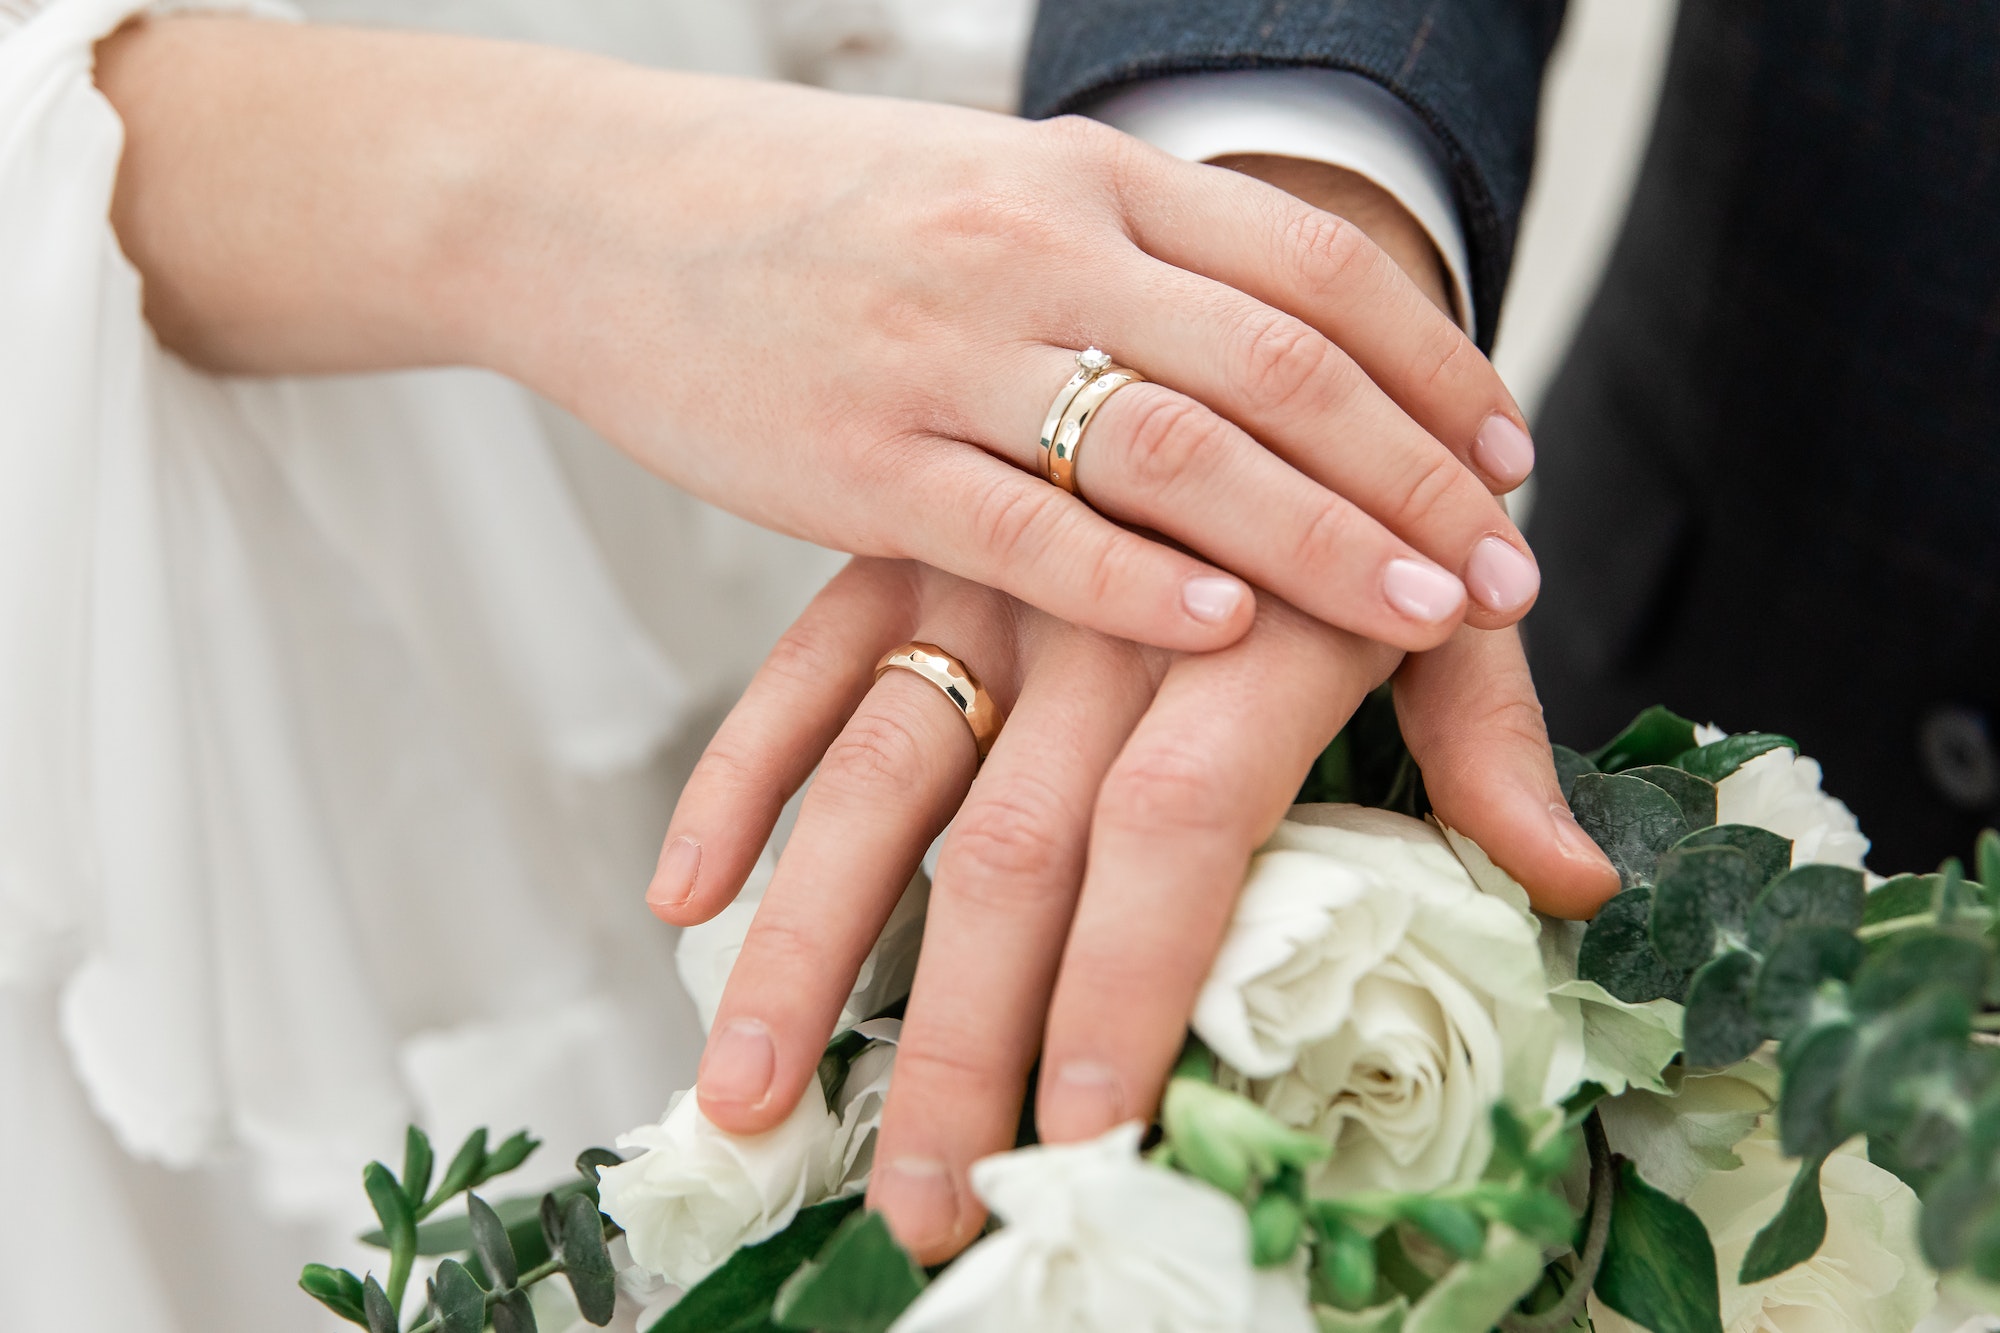 Hands of the bride and groom with wedding rings on a bouquet. The wedding ceremony. Love. Wedding ri